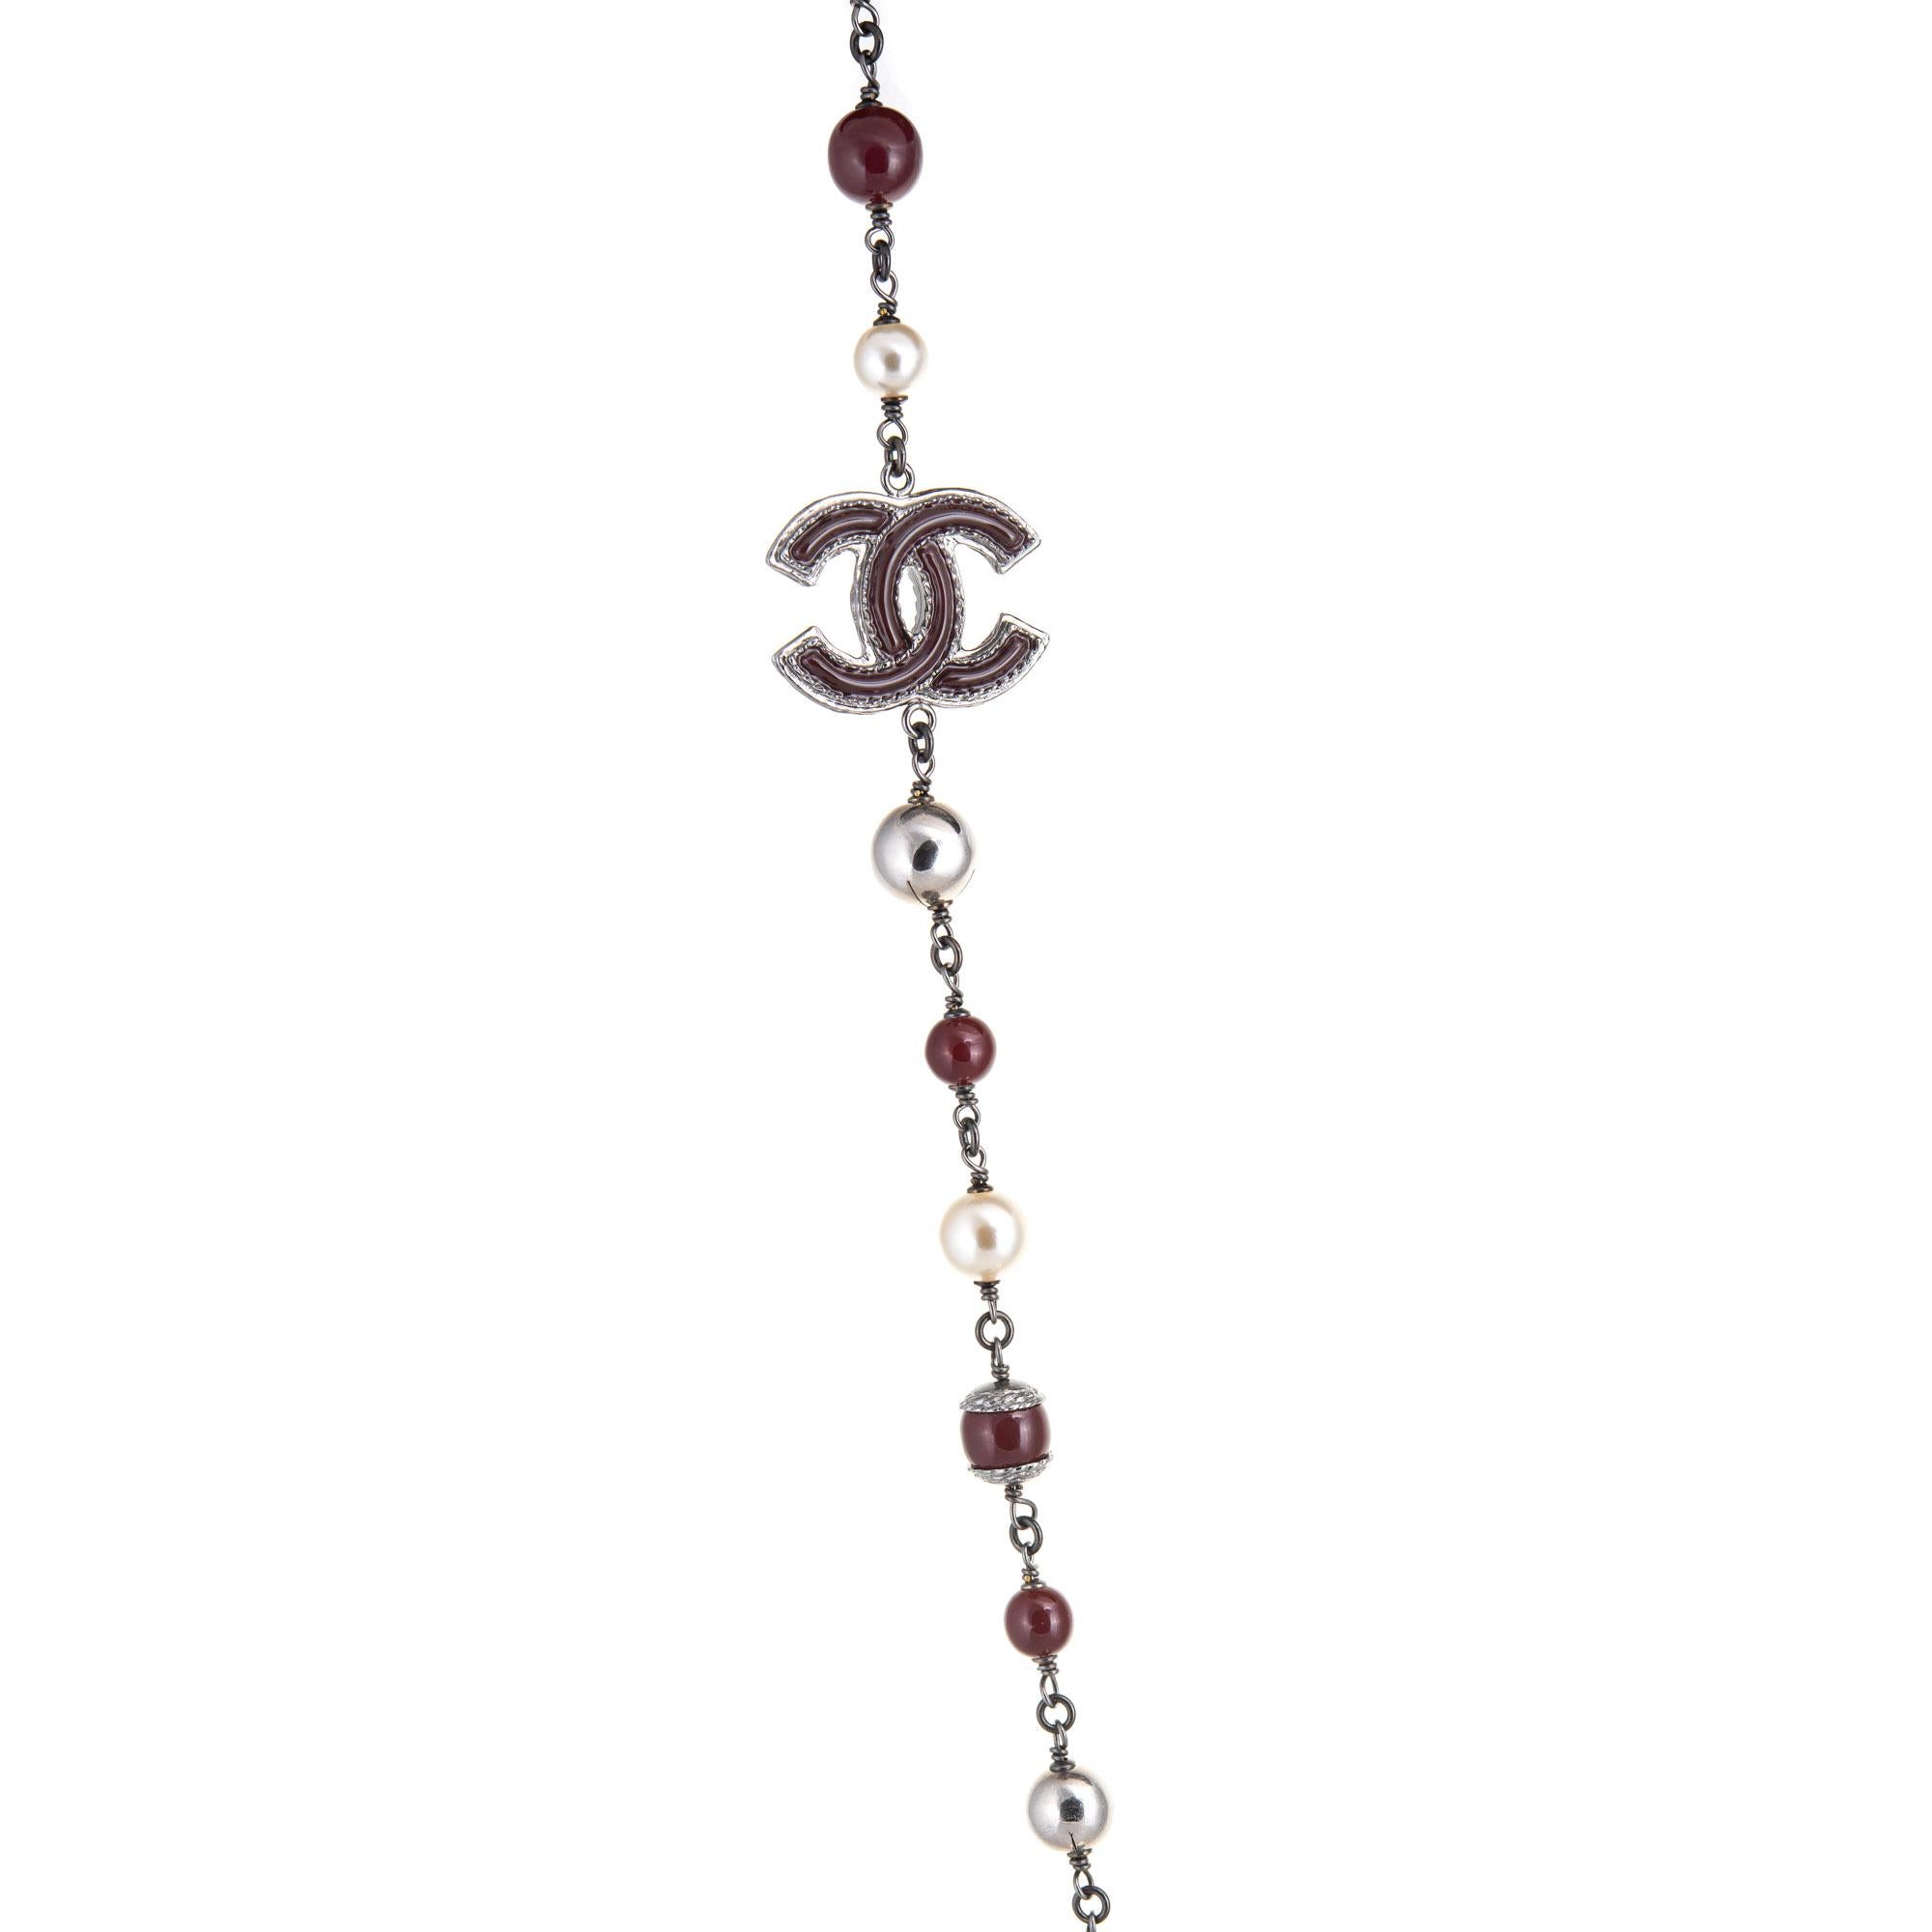 Pre-owned Chanel graduated faux pearl necklace (or belt) crafted in dark silver tone (circa 2014). 

The necklace features graduated 8mm to 12mm faux white pearls, separated with 8mm to 12mm maroon beads. Two CC logos separate the beads. The